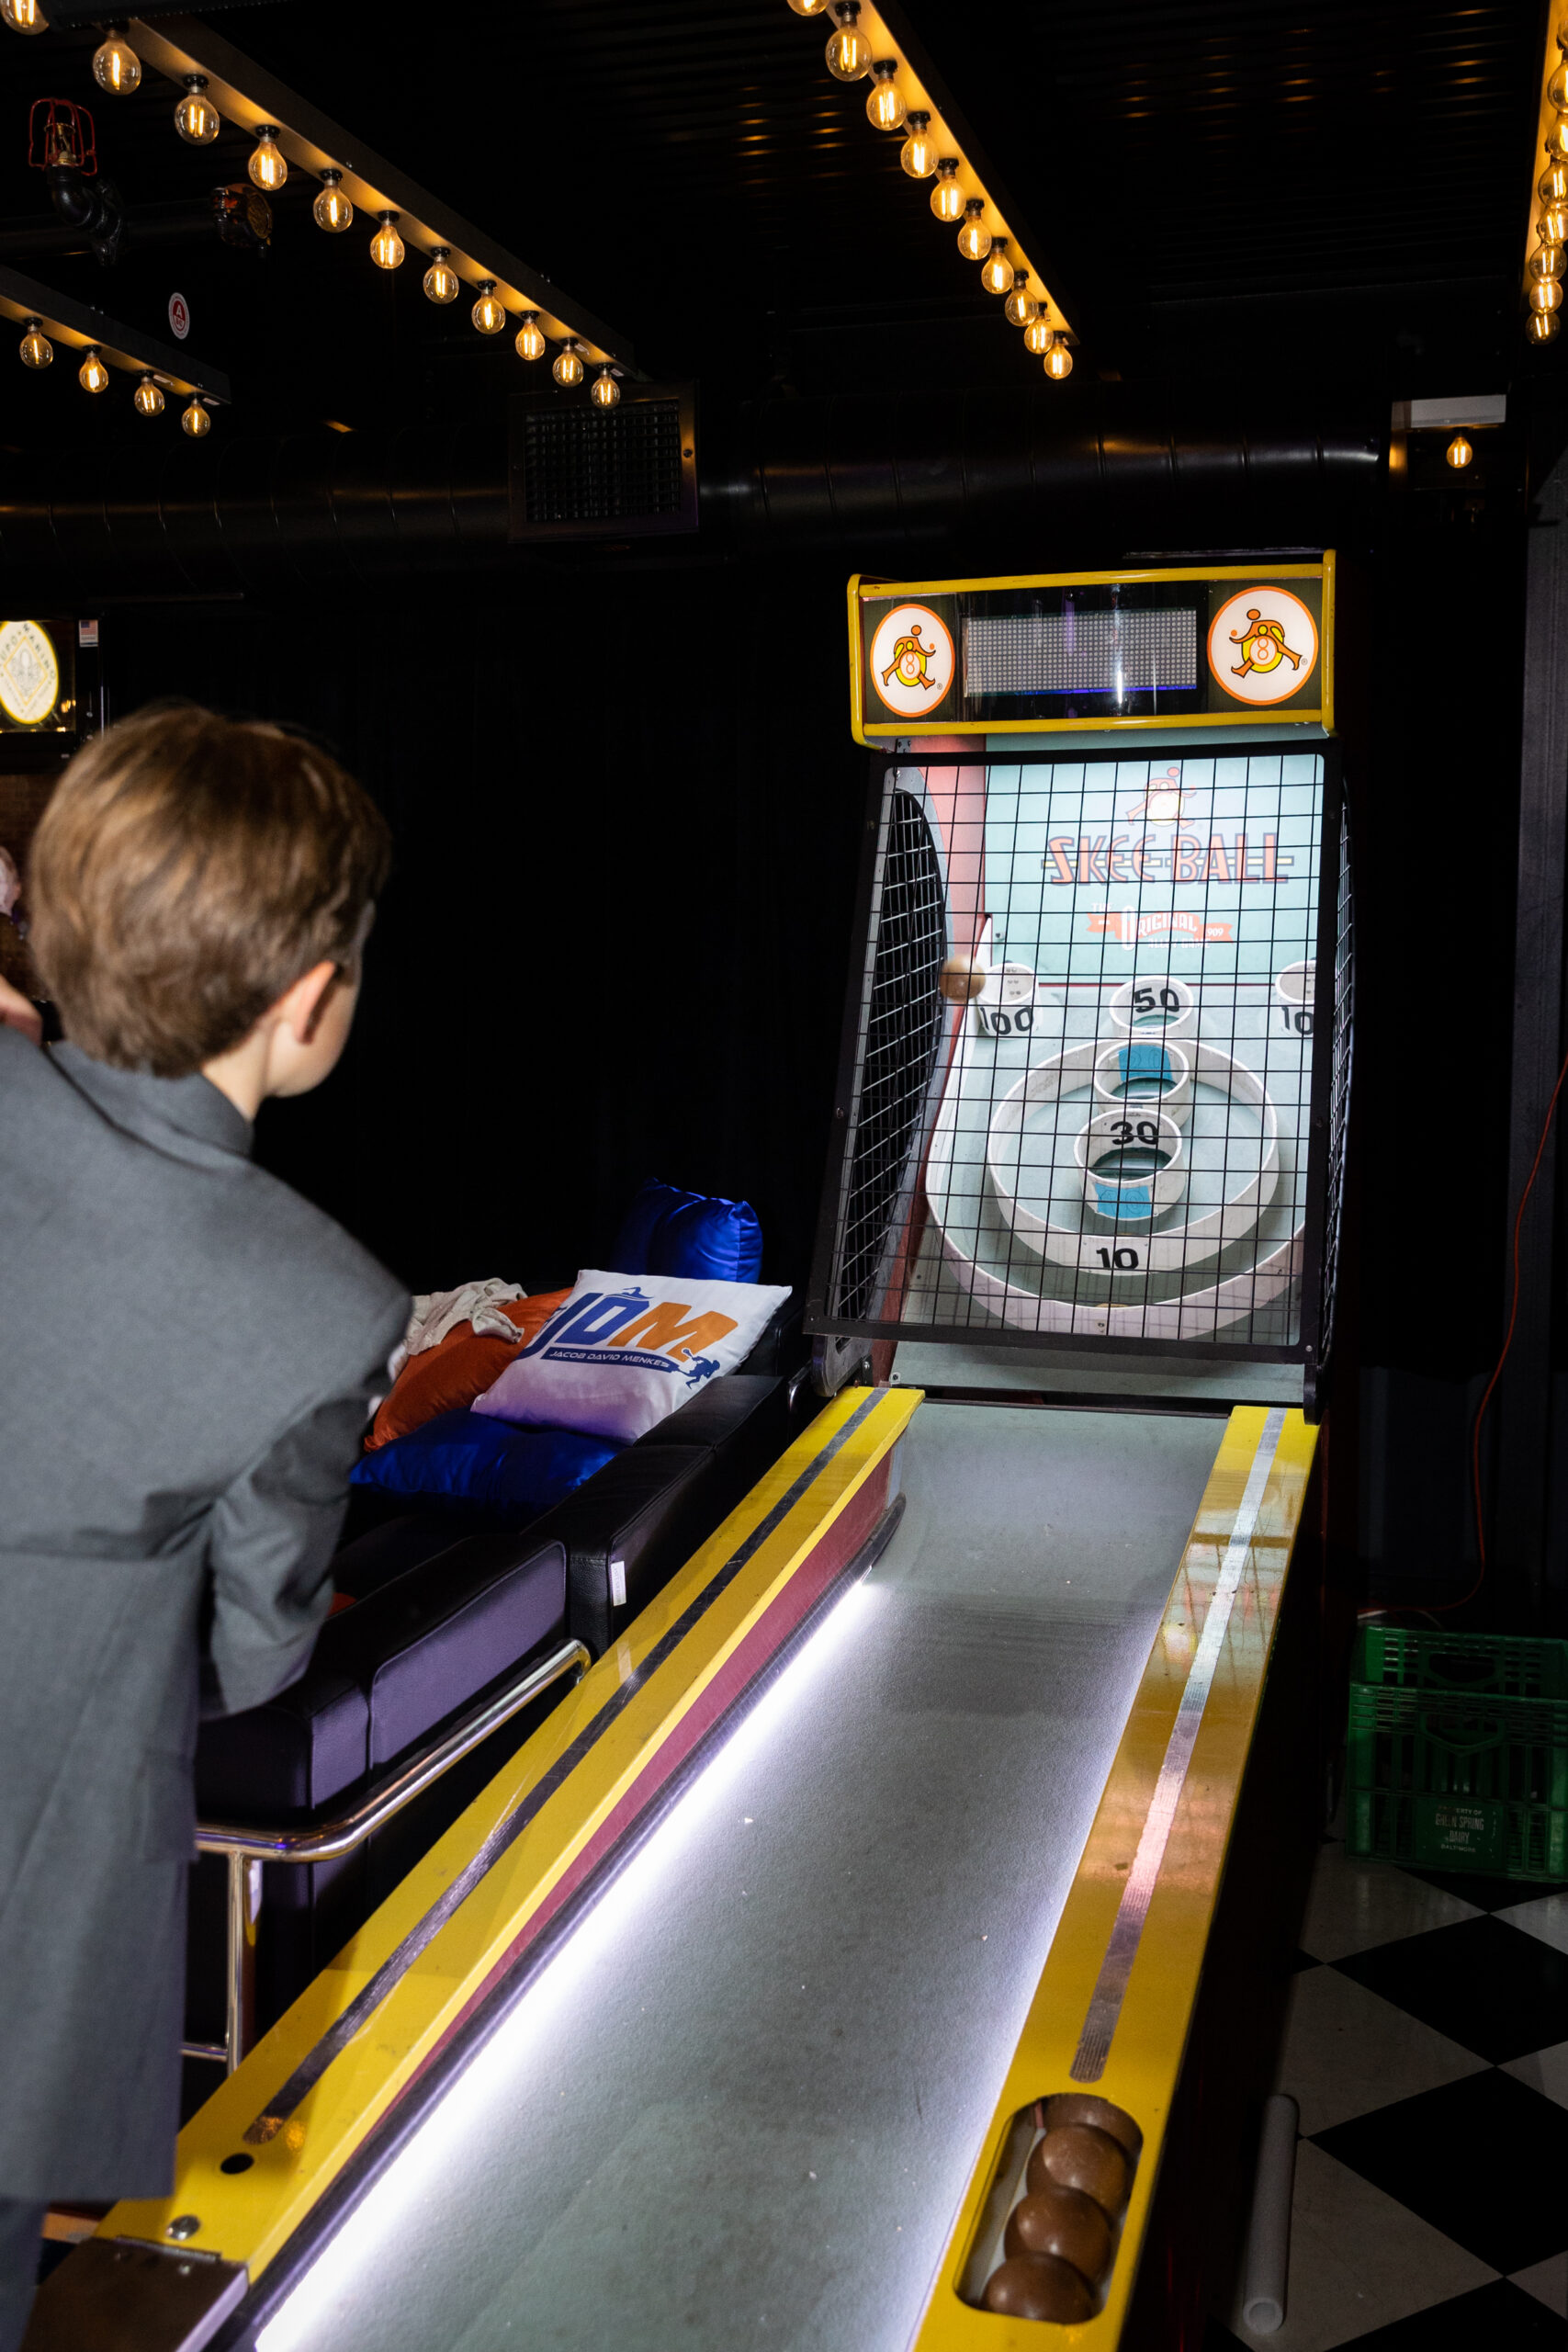 Jacob's games galore! Table tennis, skeeball, foosball, video games and more at Jacob's Sporty Bar Mitzvah Party at Pearl Street Warehouse in Washington, DC | Pop Color Events | Adding a Pop of Color to Bar & Bat Mitzvahs in DC, MD & VA | Photo by: Jessica Latos Photography